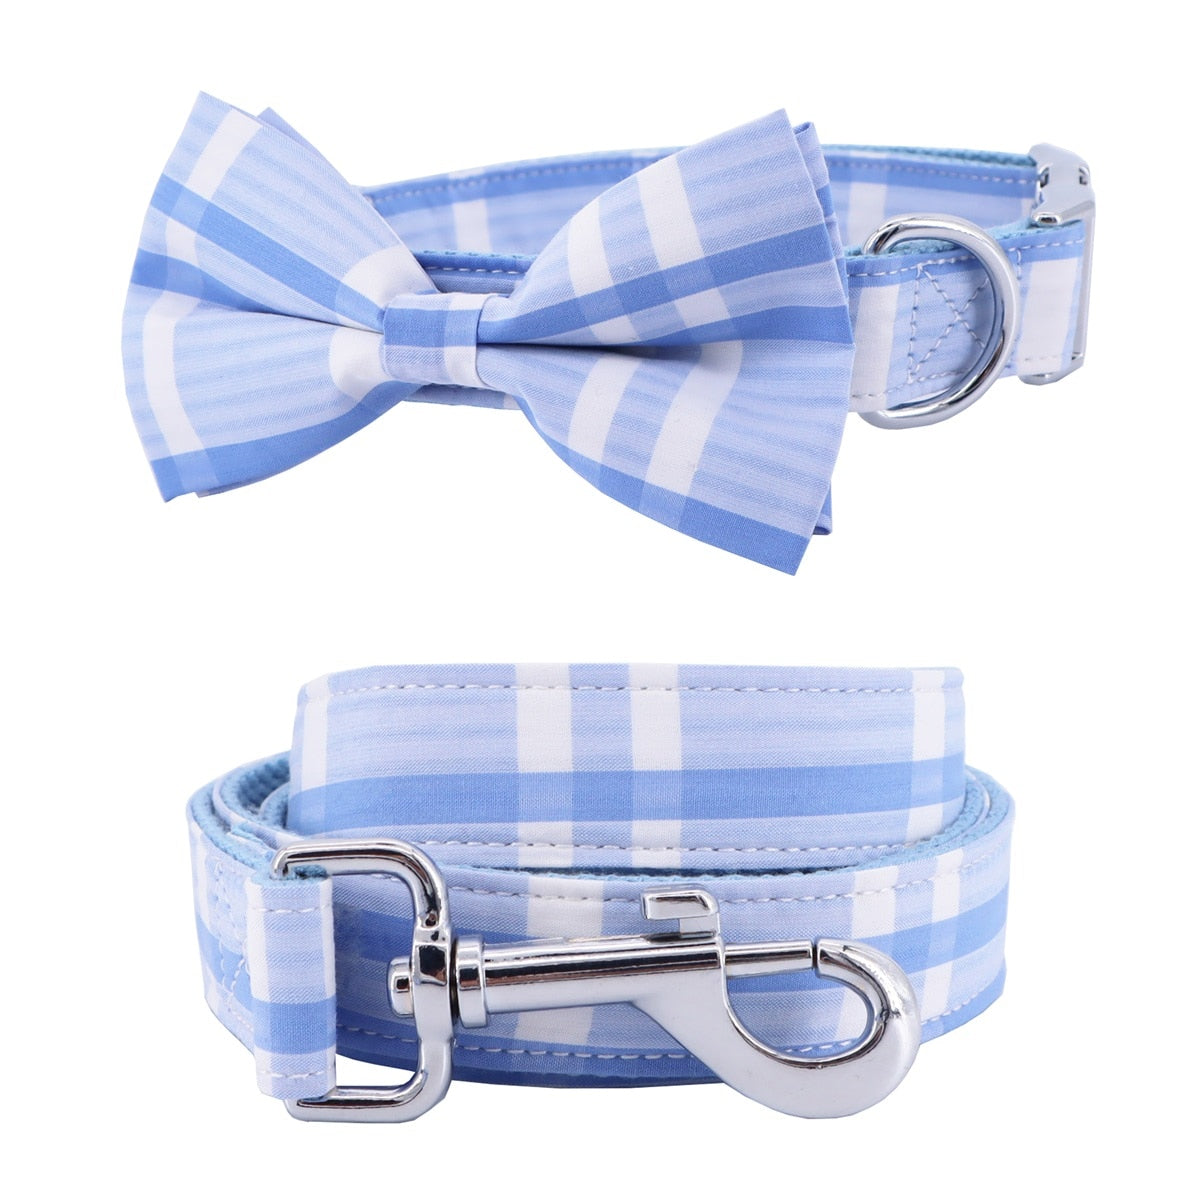 Blues And Skies: Personalized Collars And Leashes